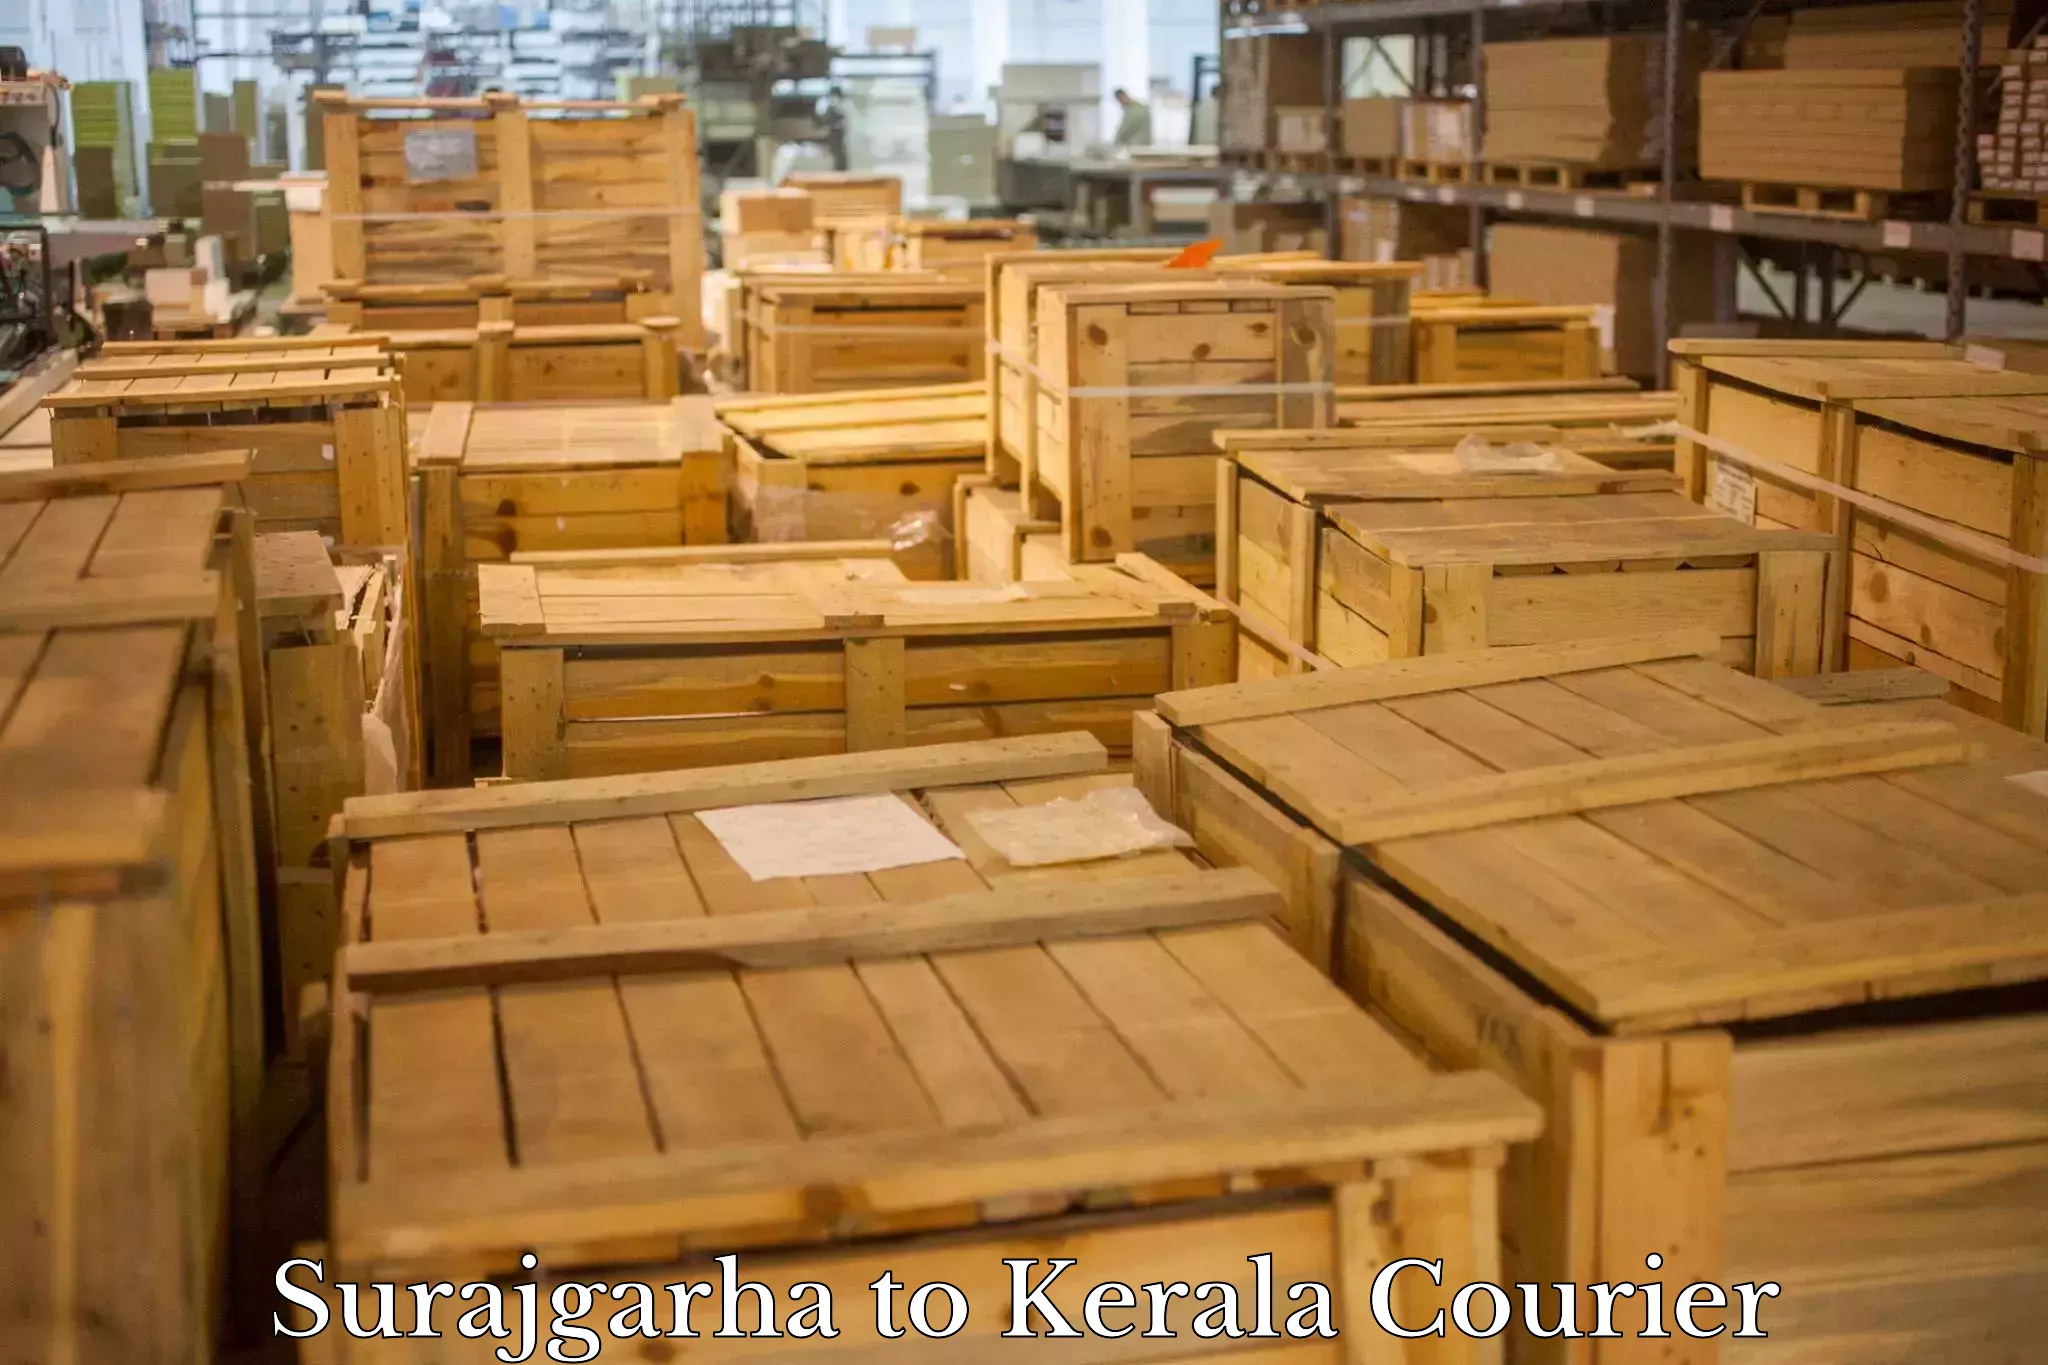 Expedited shipping methods Surajgarha to Cochin University of Science and Technology